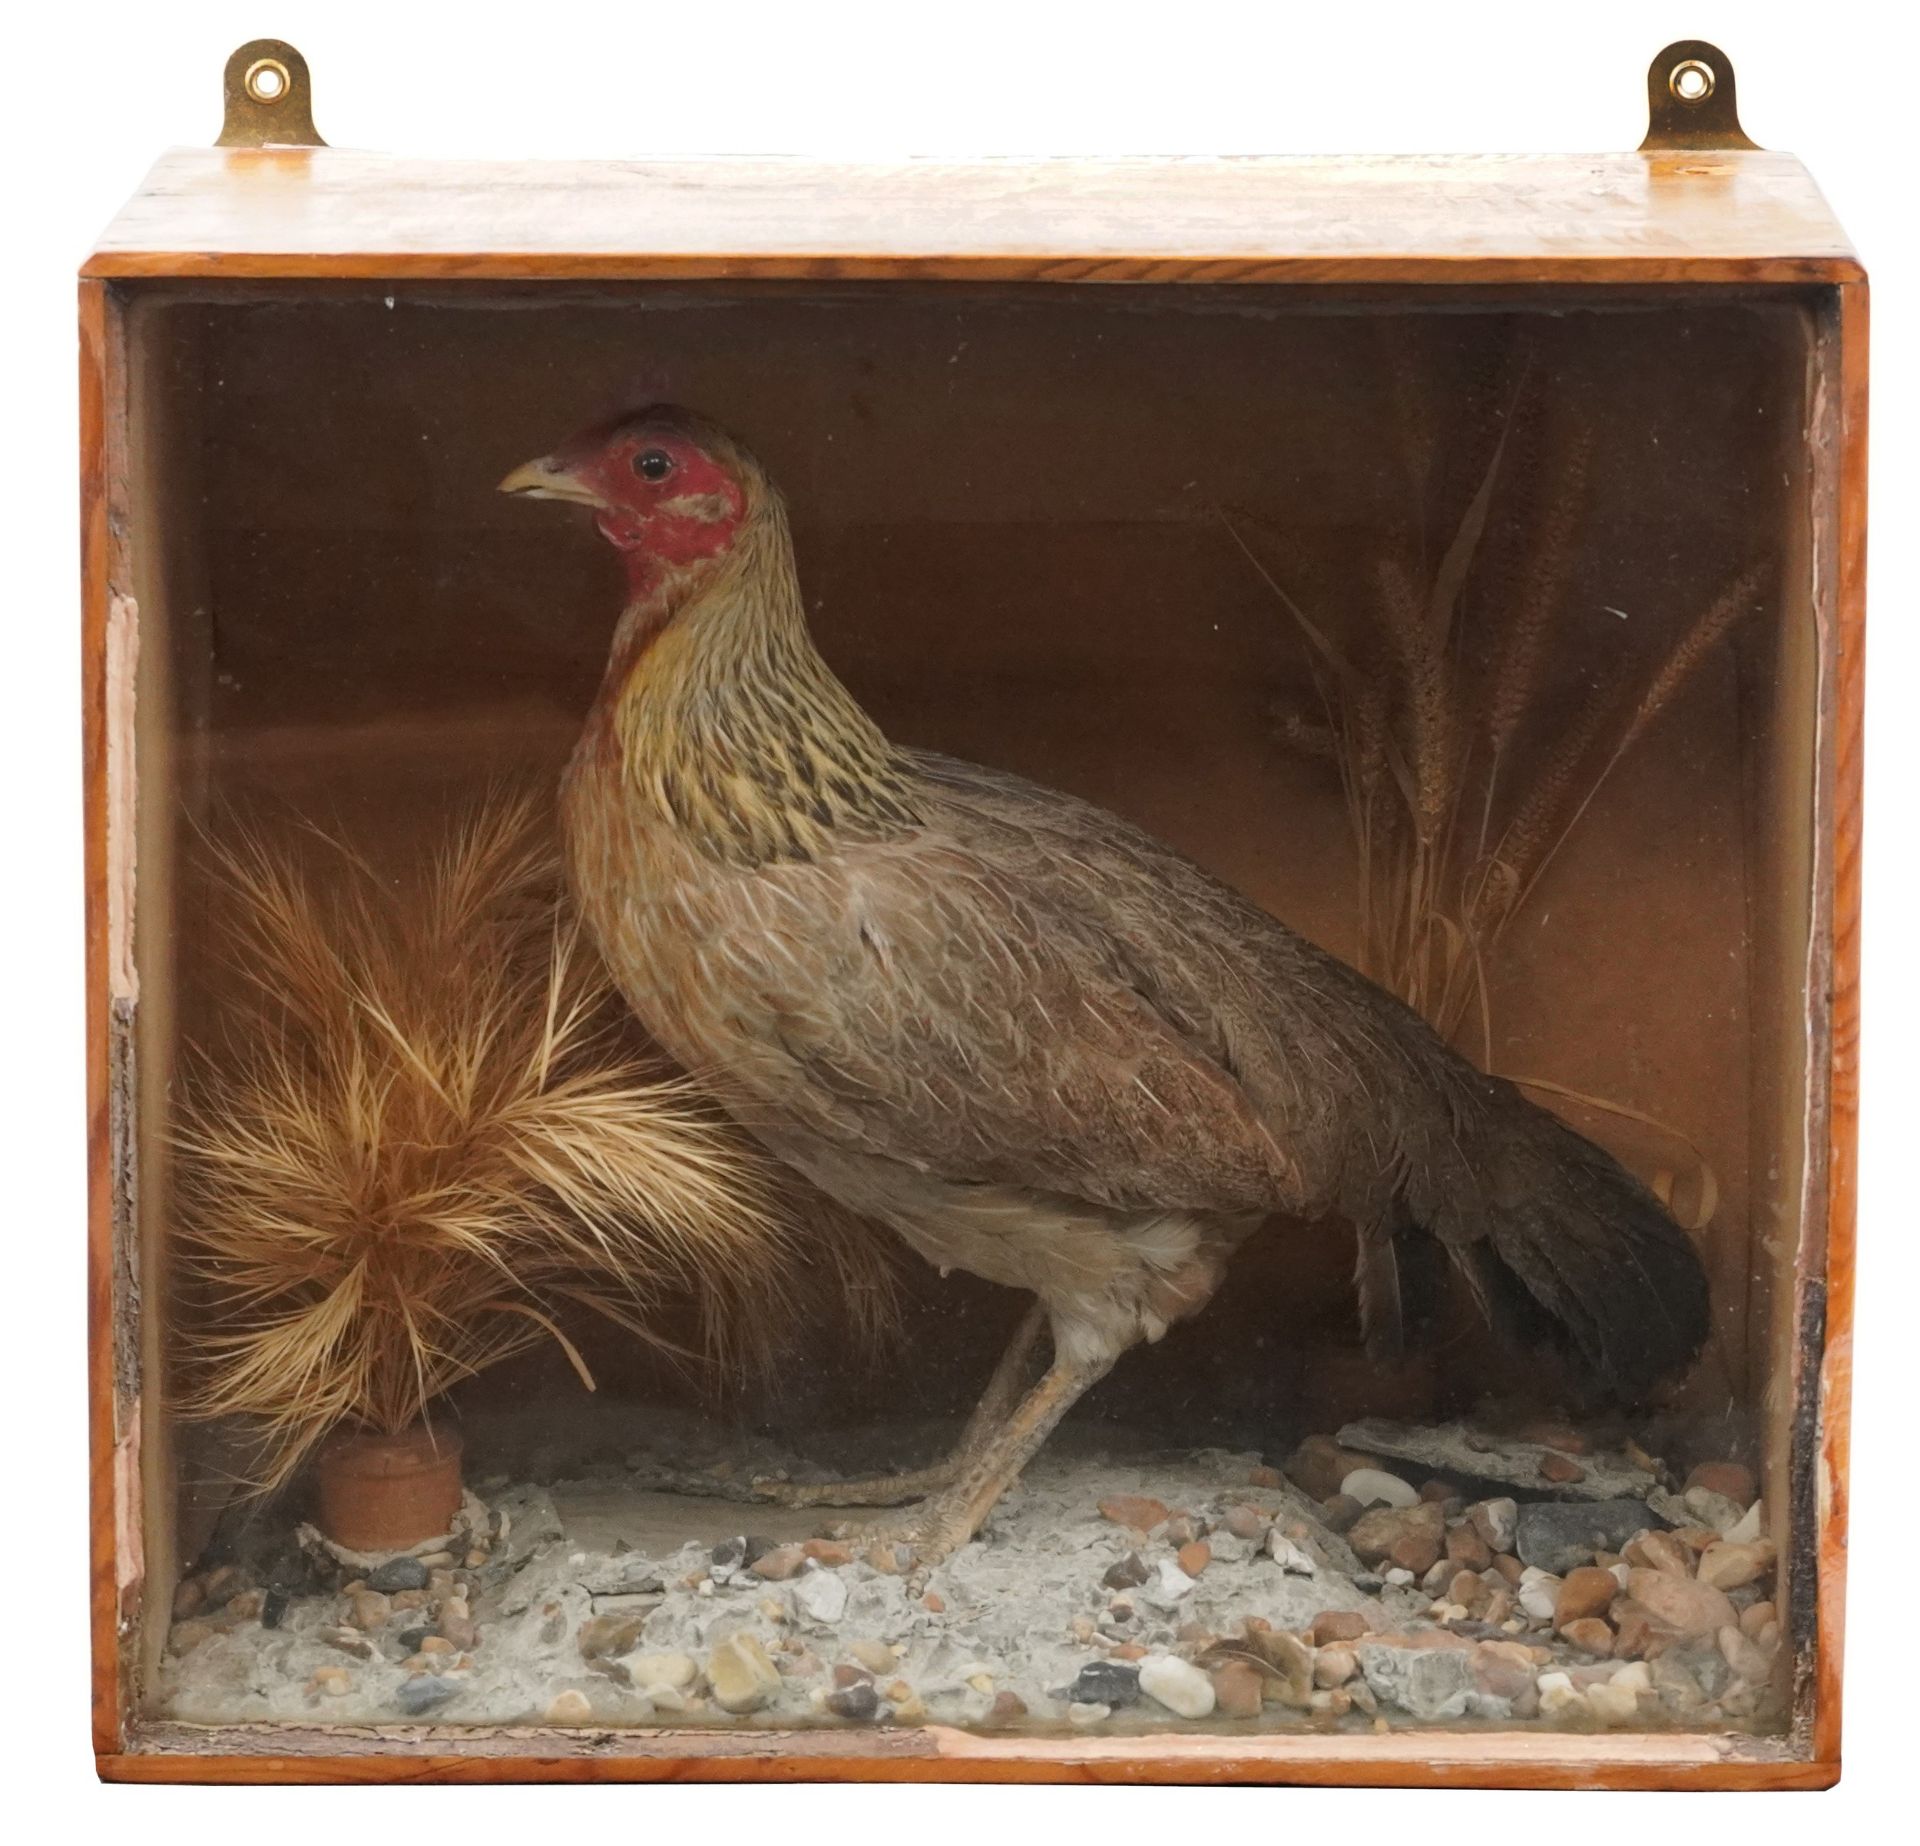 Taxidermy interest bantam chicken housed in a glazed pine display case with naturalistic setting, - Image 2 of 4